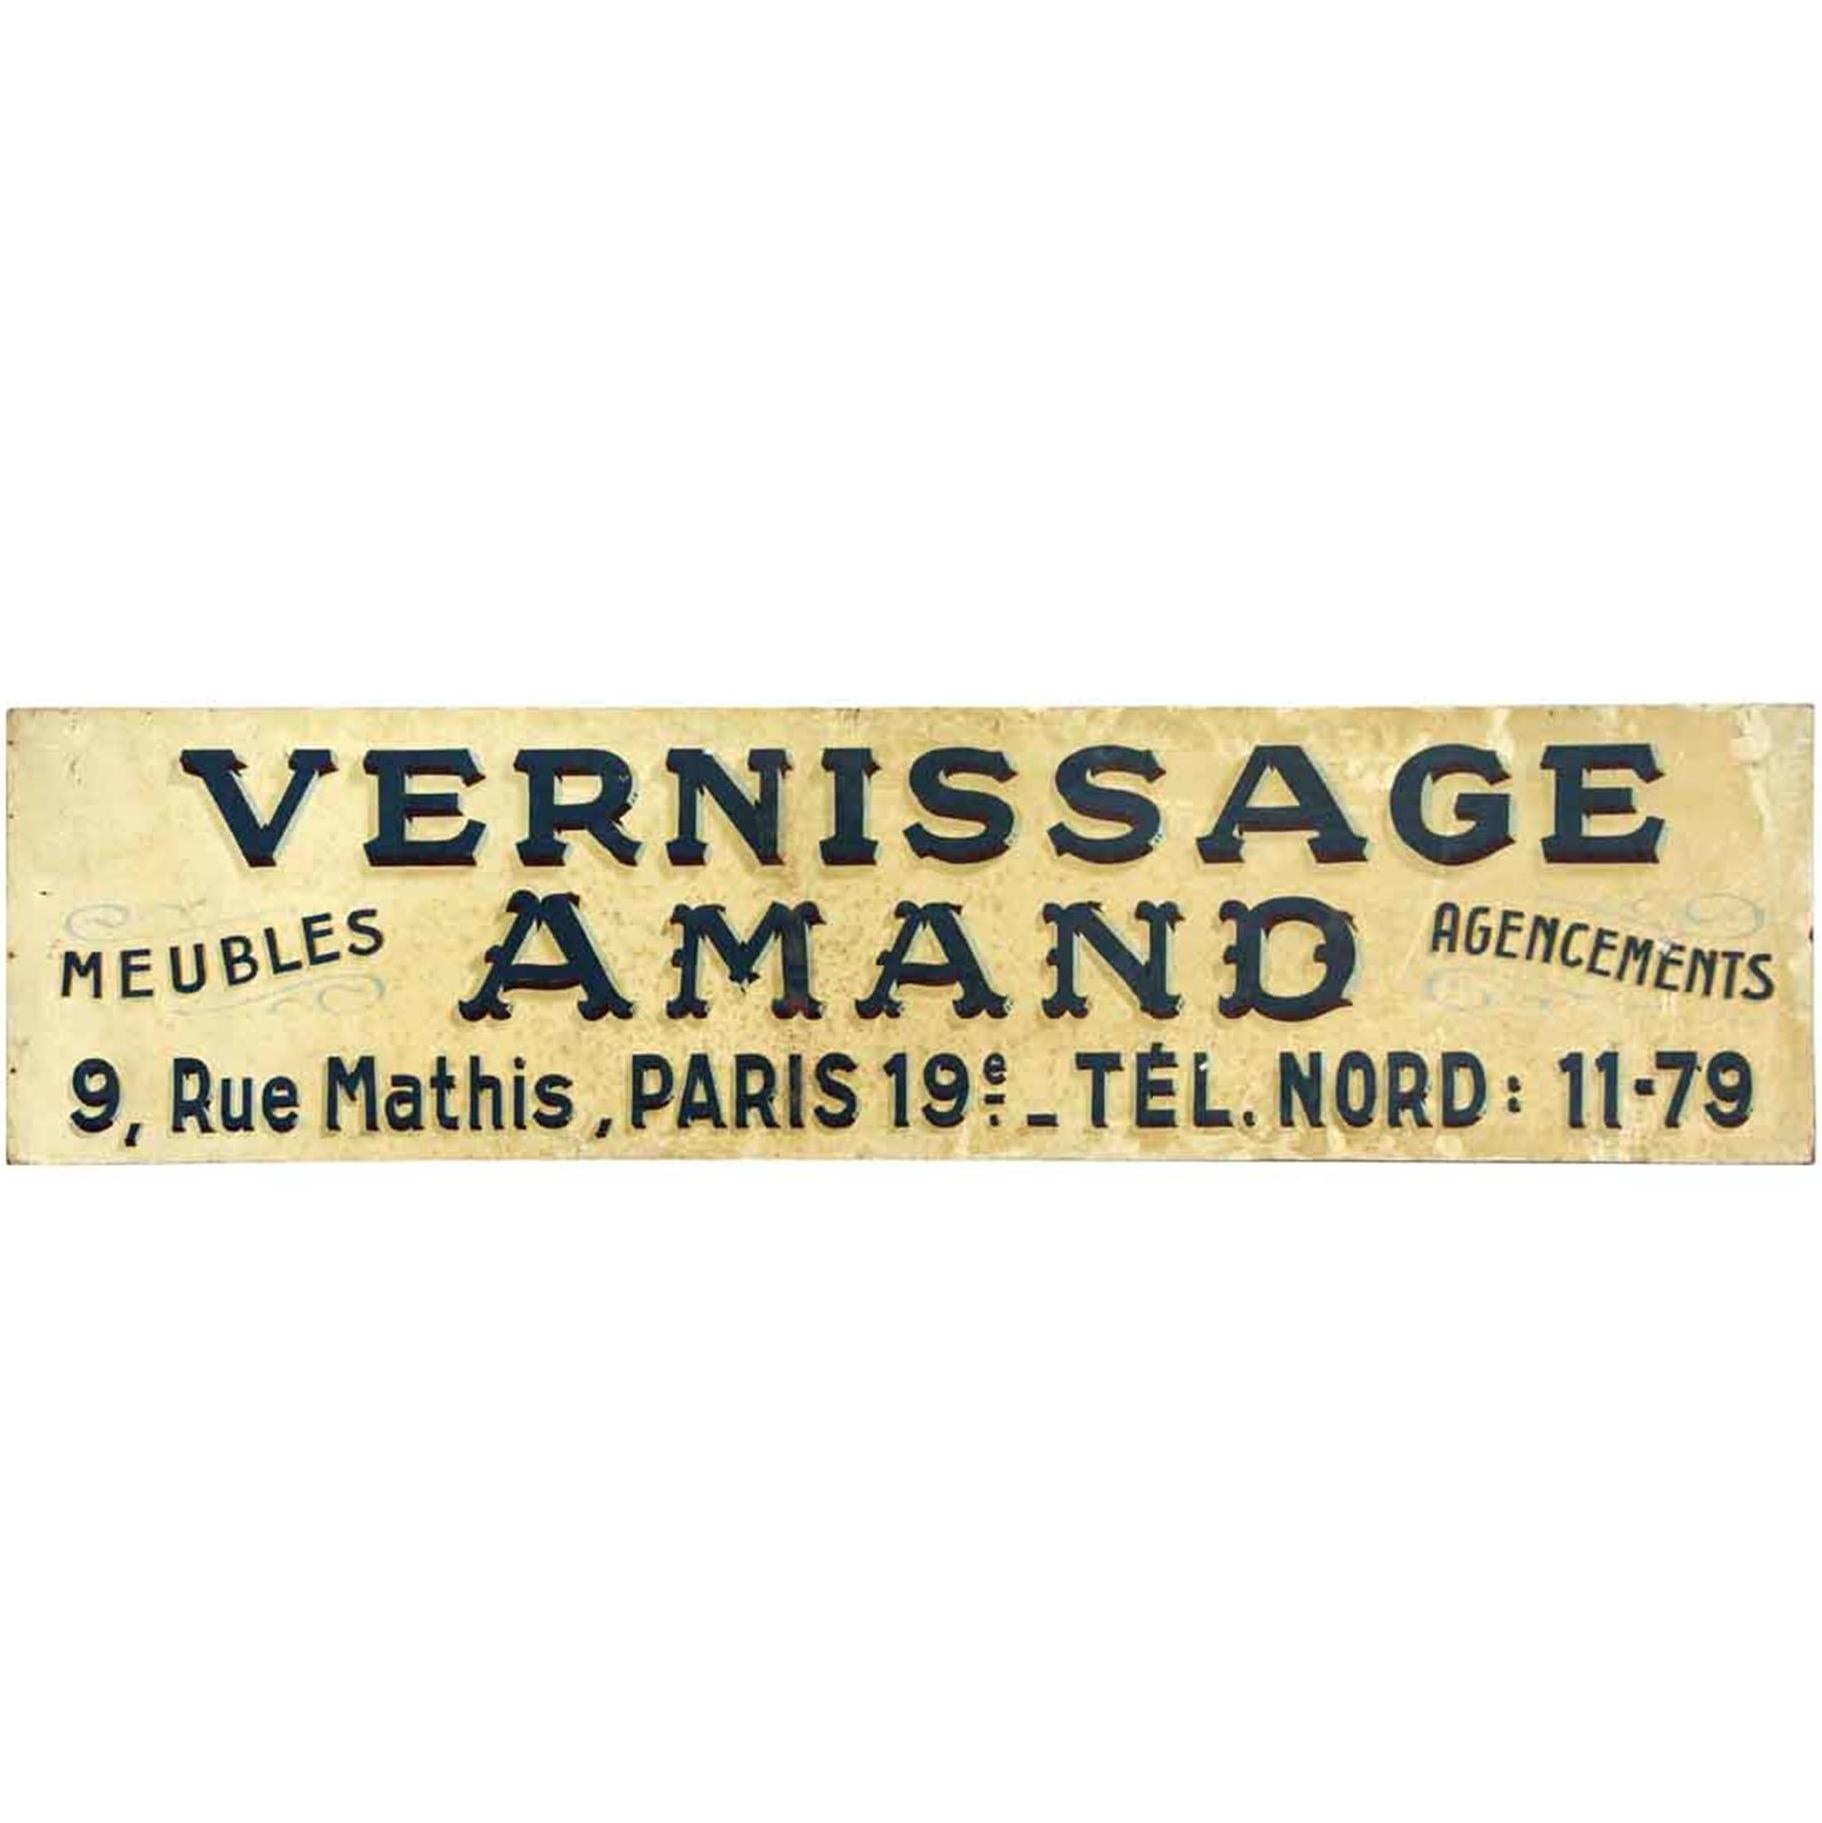 1940s French Vernissage Amand Advertising Sign